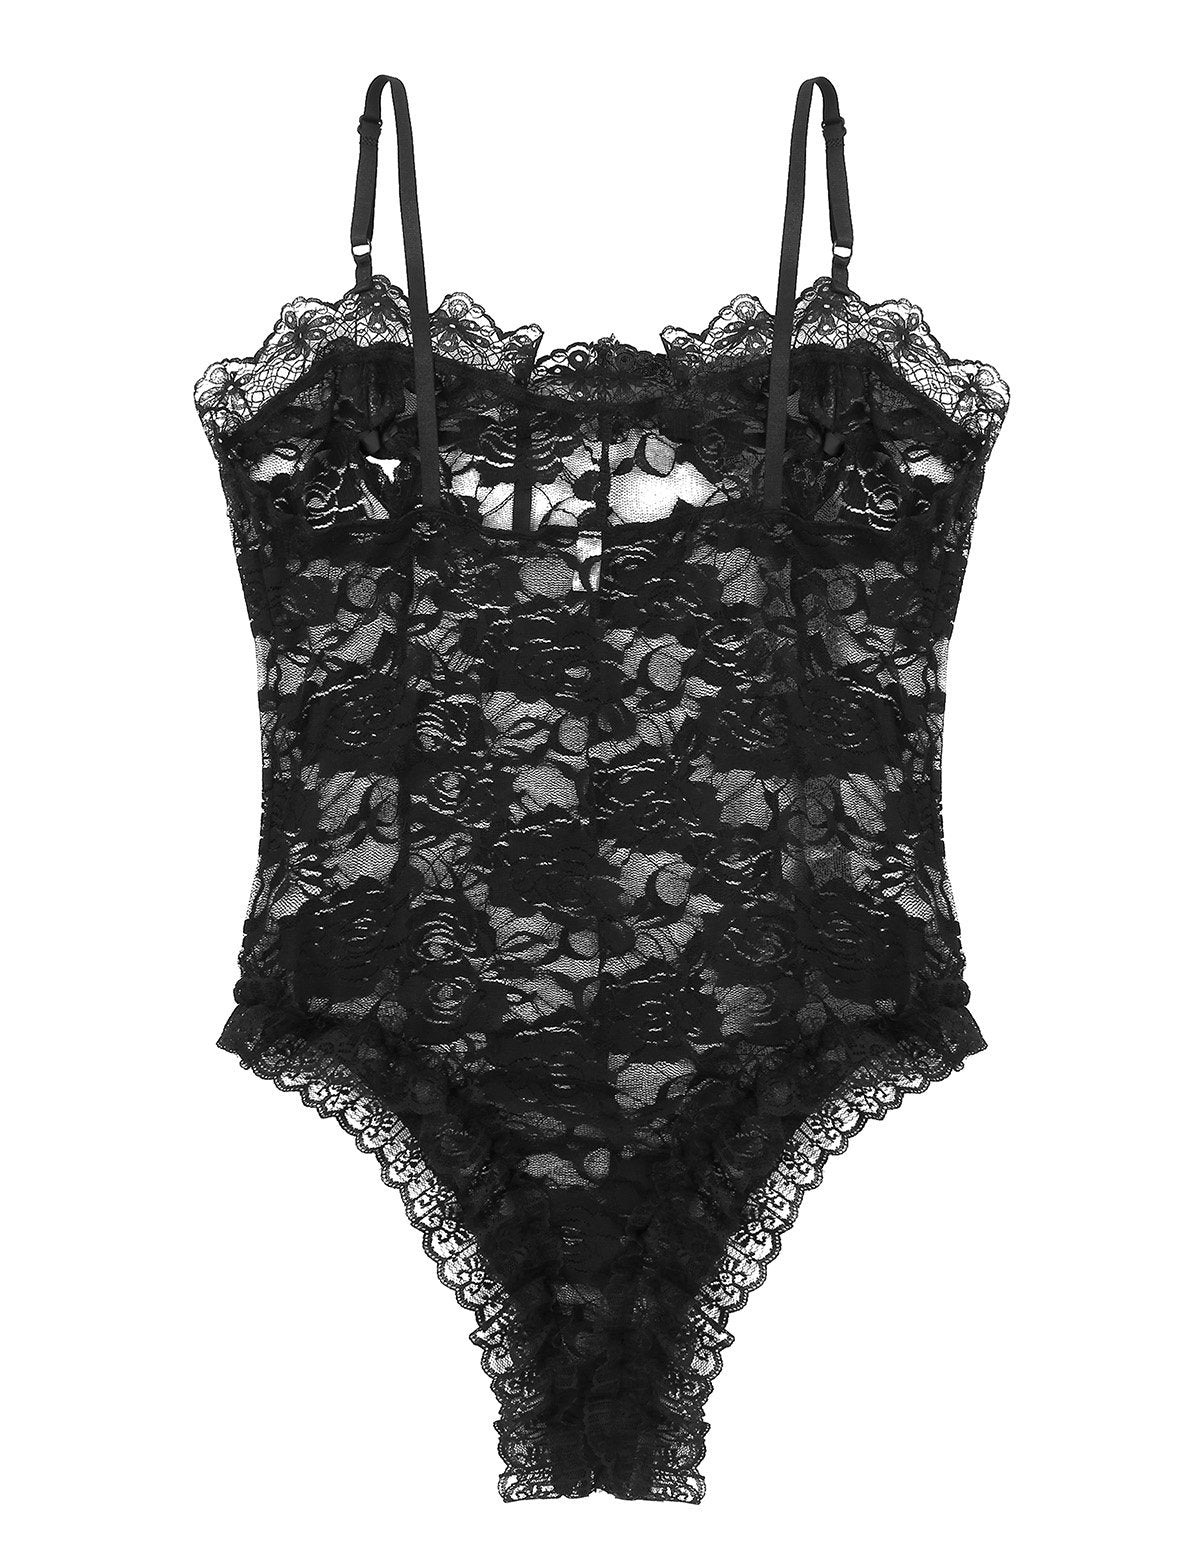 Mens Sheer Lace Bodysuit with Lace Trim Open Nipples Black